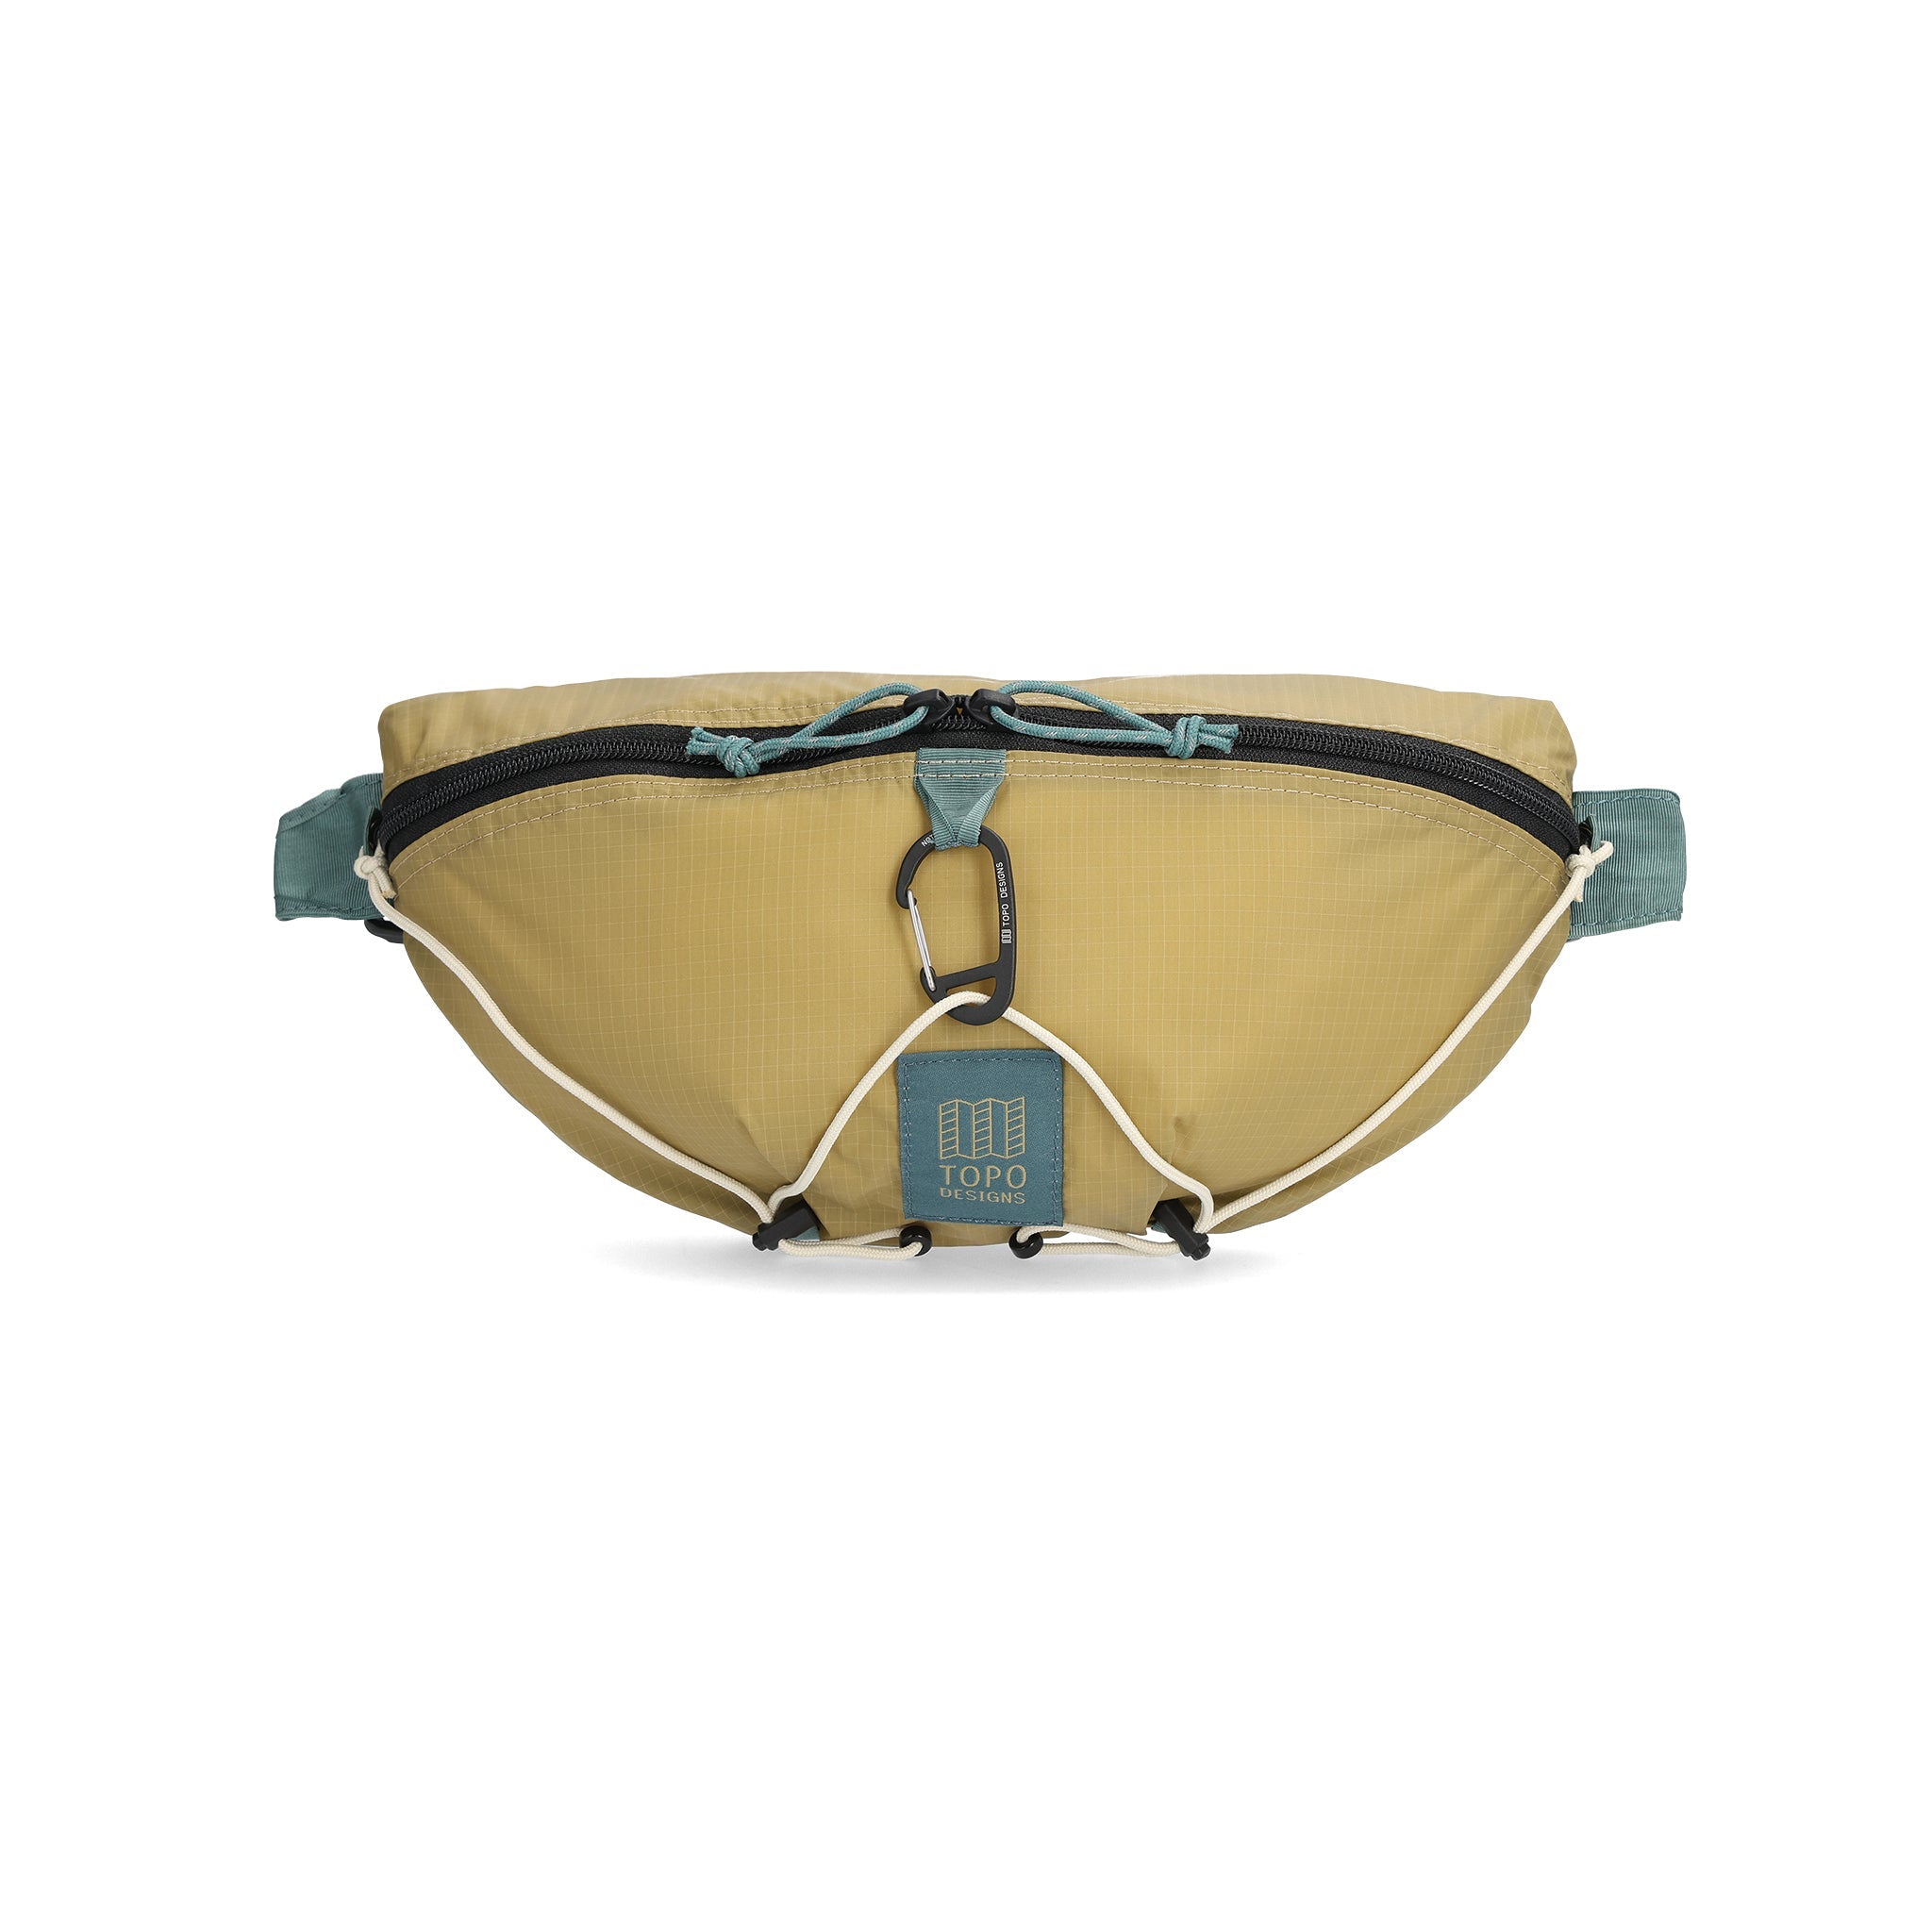 Front View of Topo Designs Topolite™ Hip Pack in "Moss"